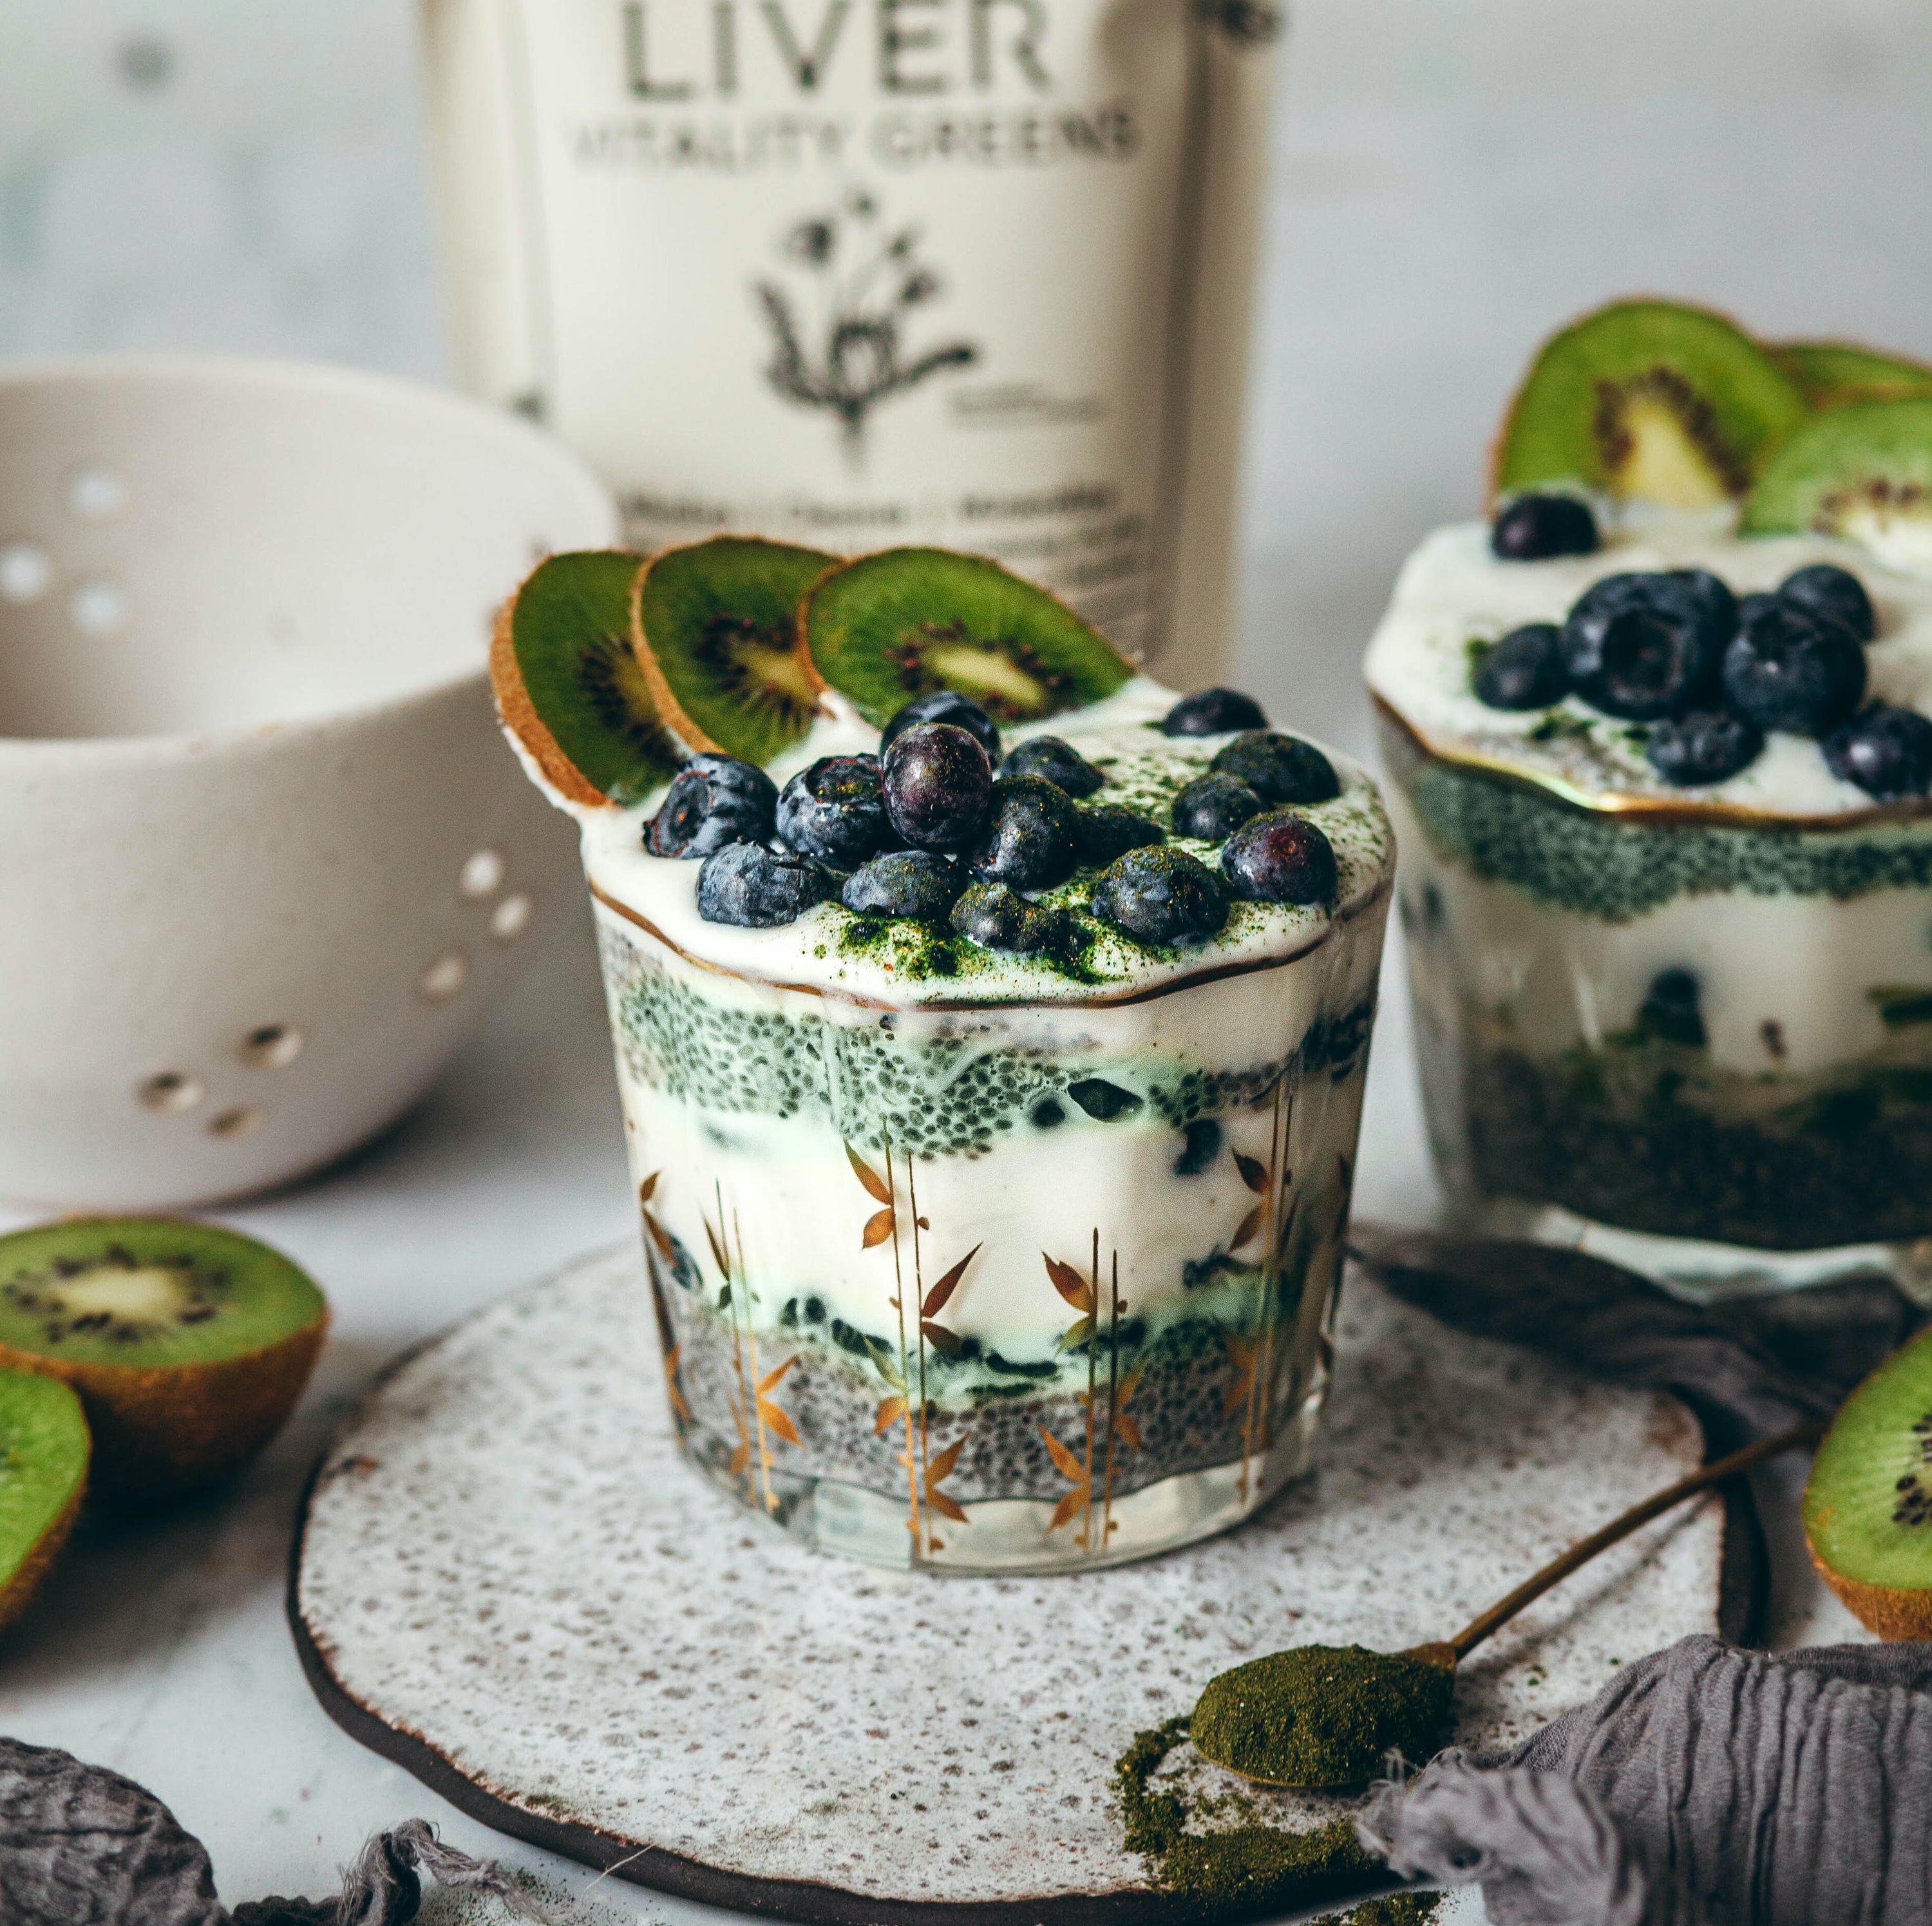 LIVER LOVING CHIA with Cellular Detoxifiers